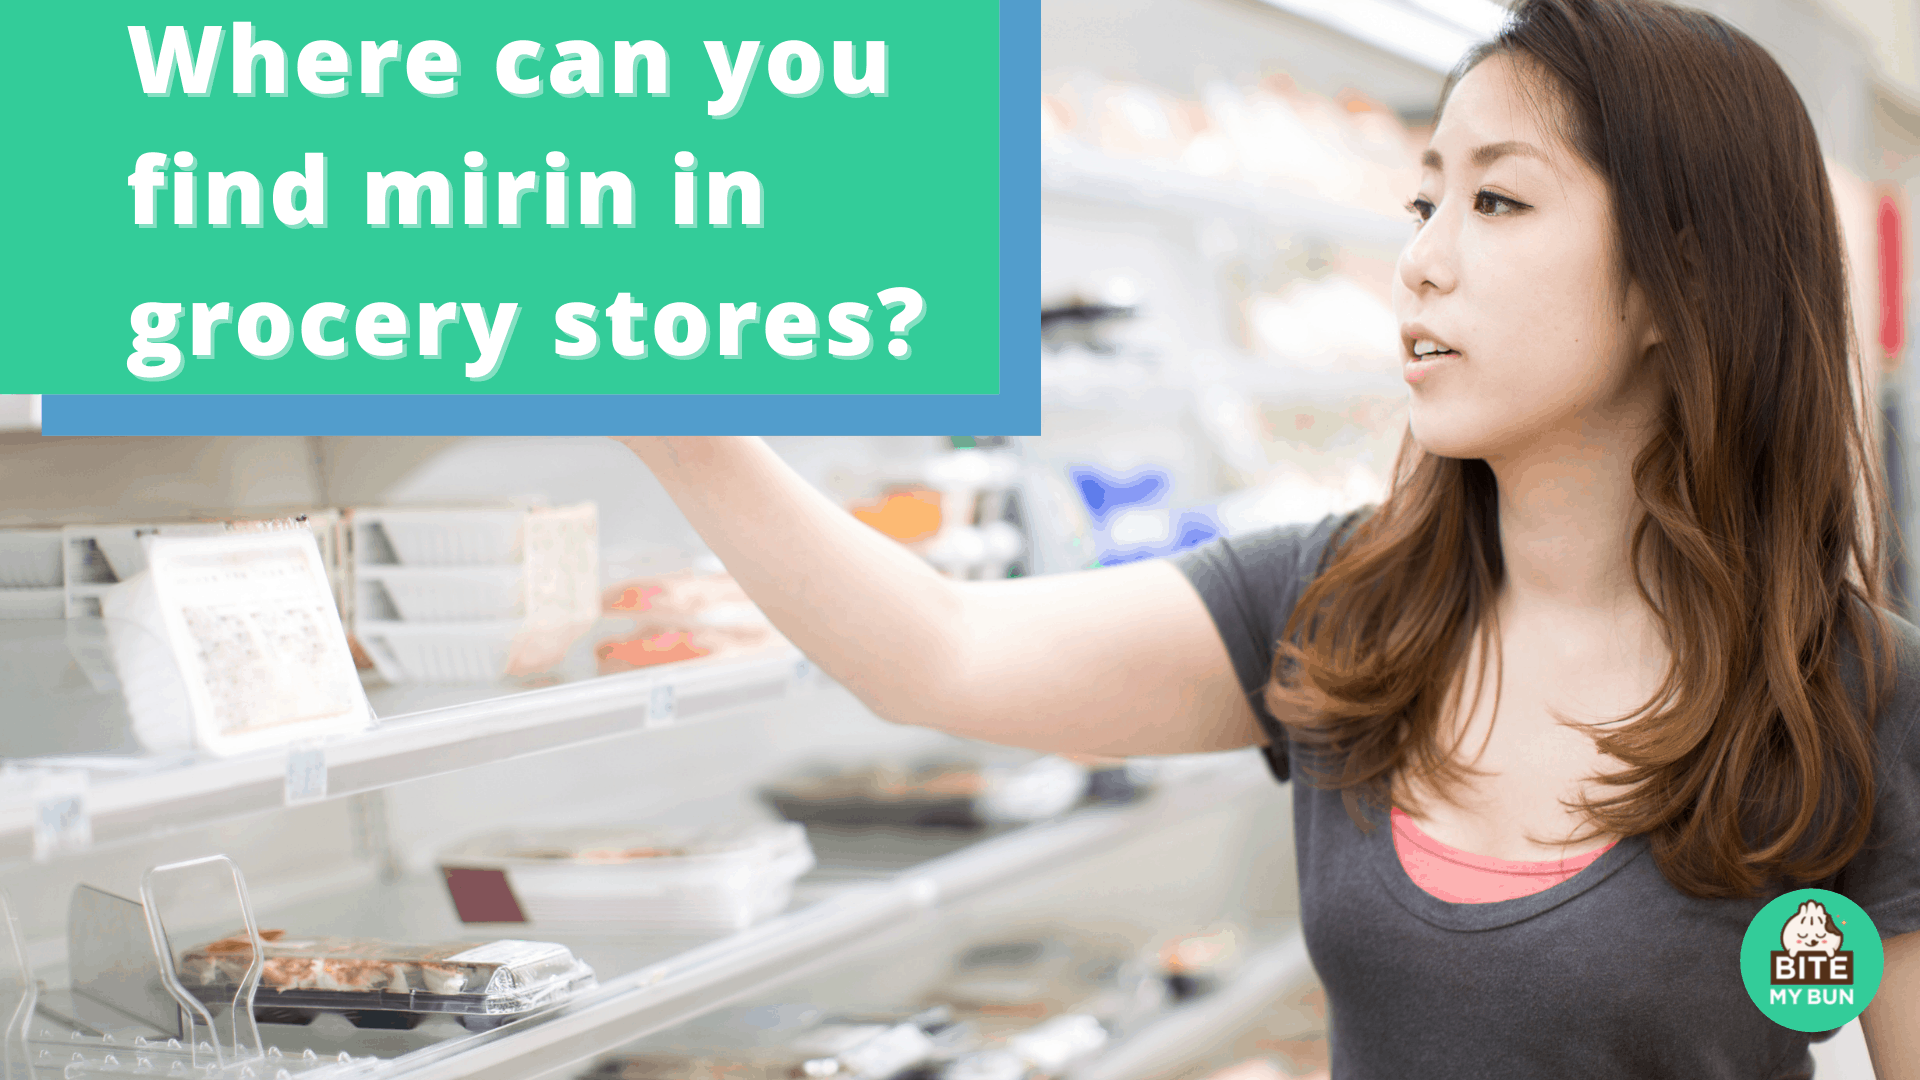 Where can you find mirin in grocery stores?